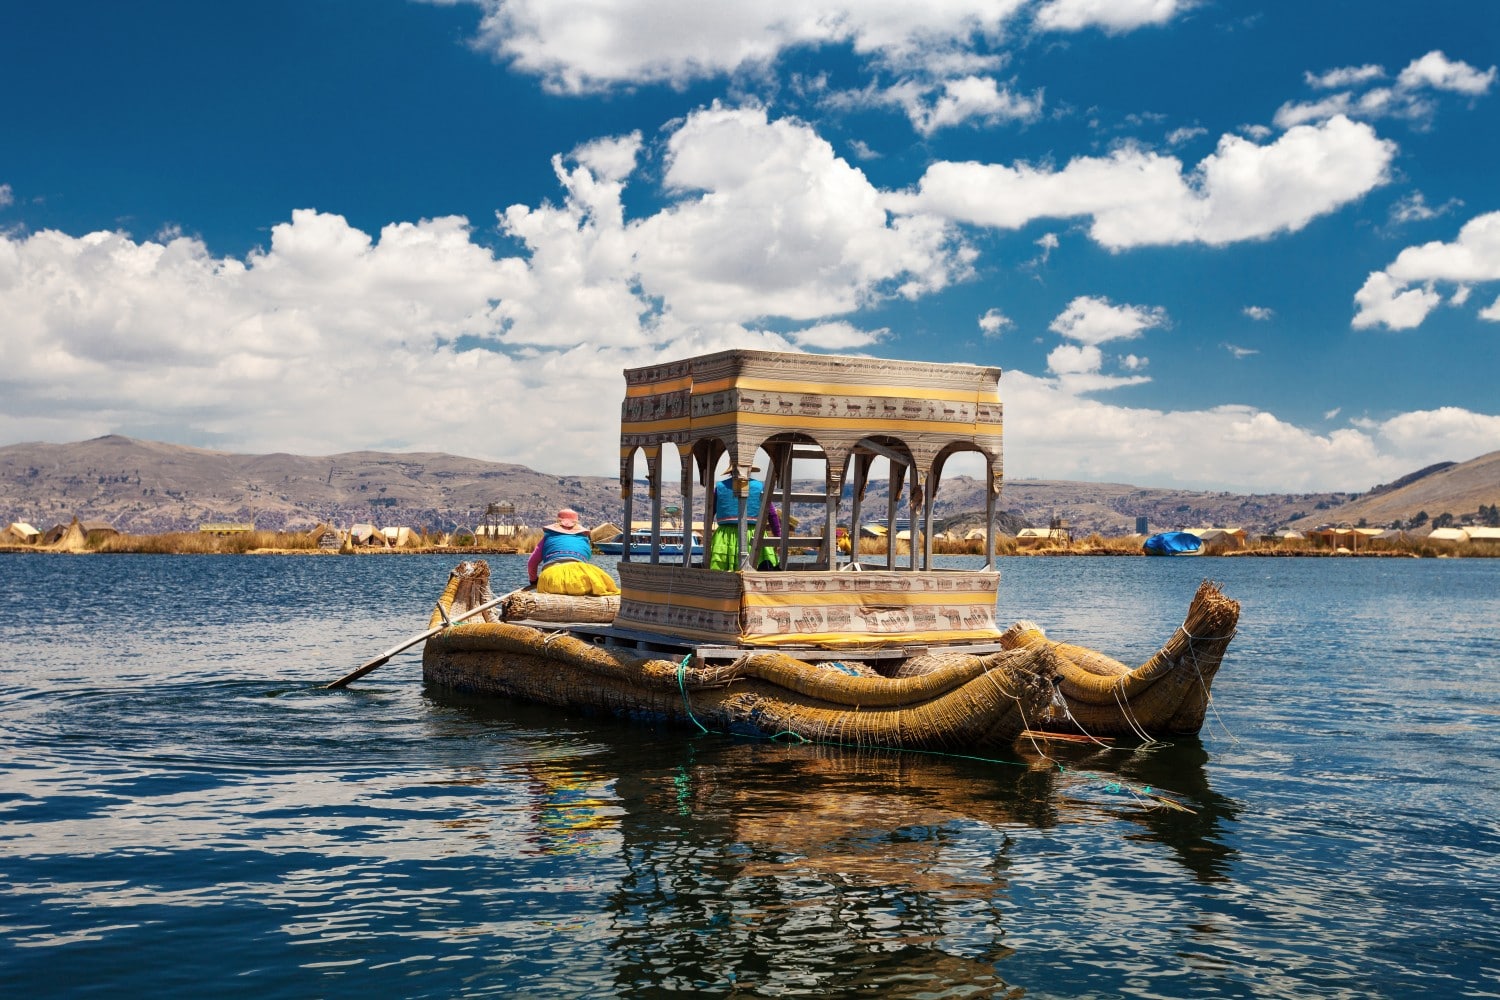 Lake Titicaca is one of the best things to do in Bolivia. Here's why